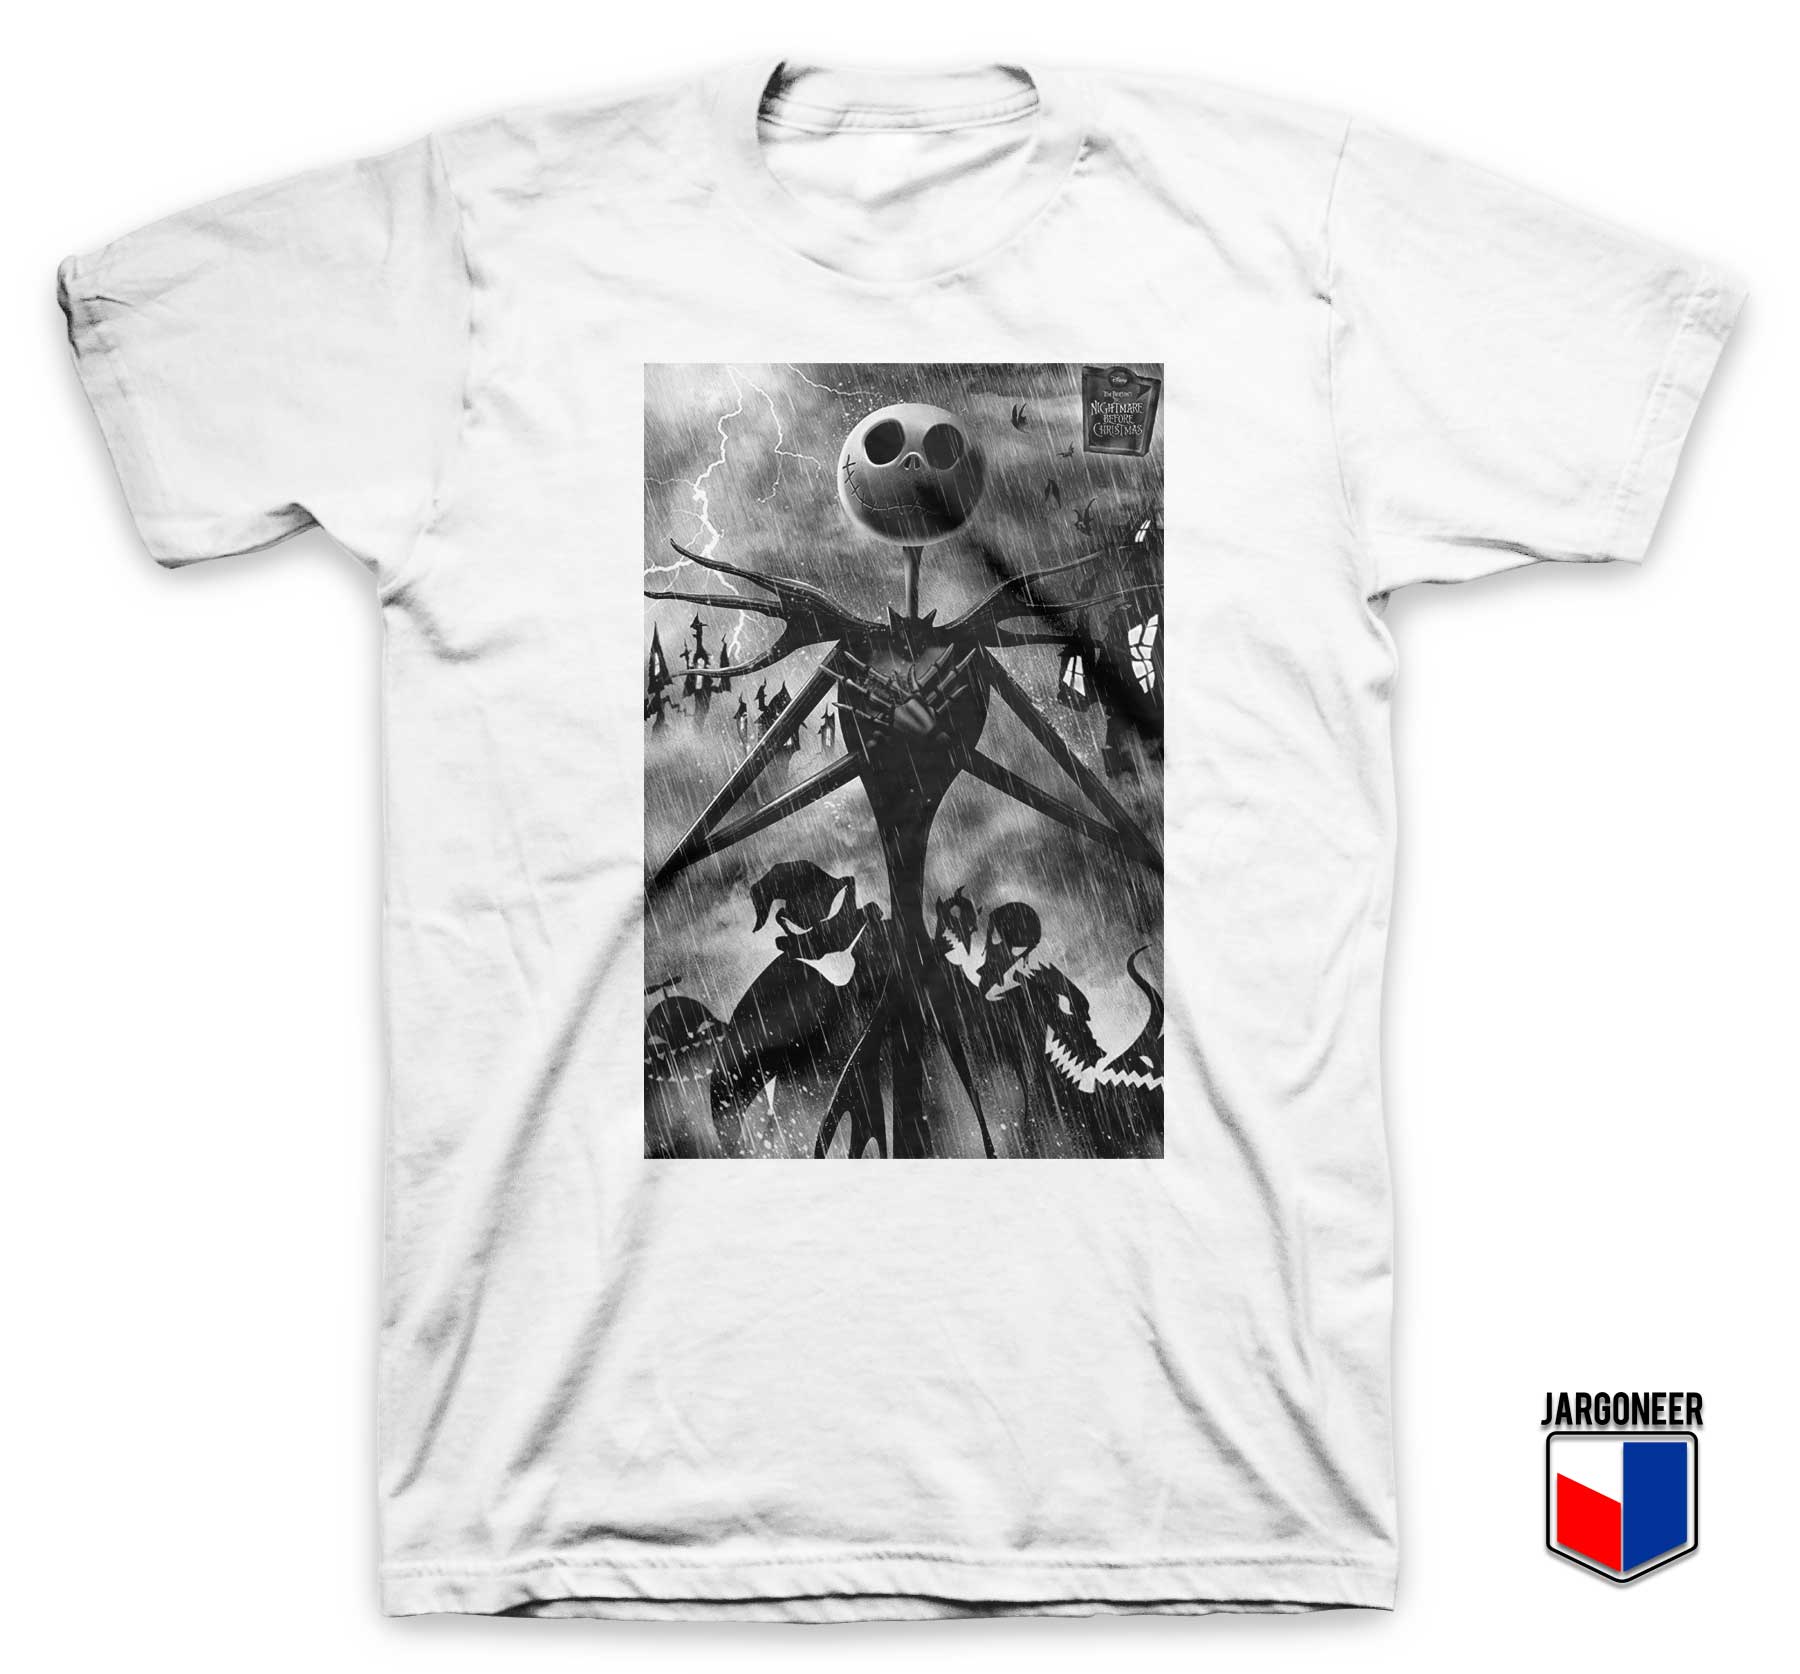 The Nightmare Before Christmas White T Shirt - Shop Unique Graphic Cool Shirt Designs